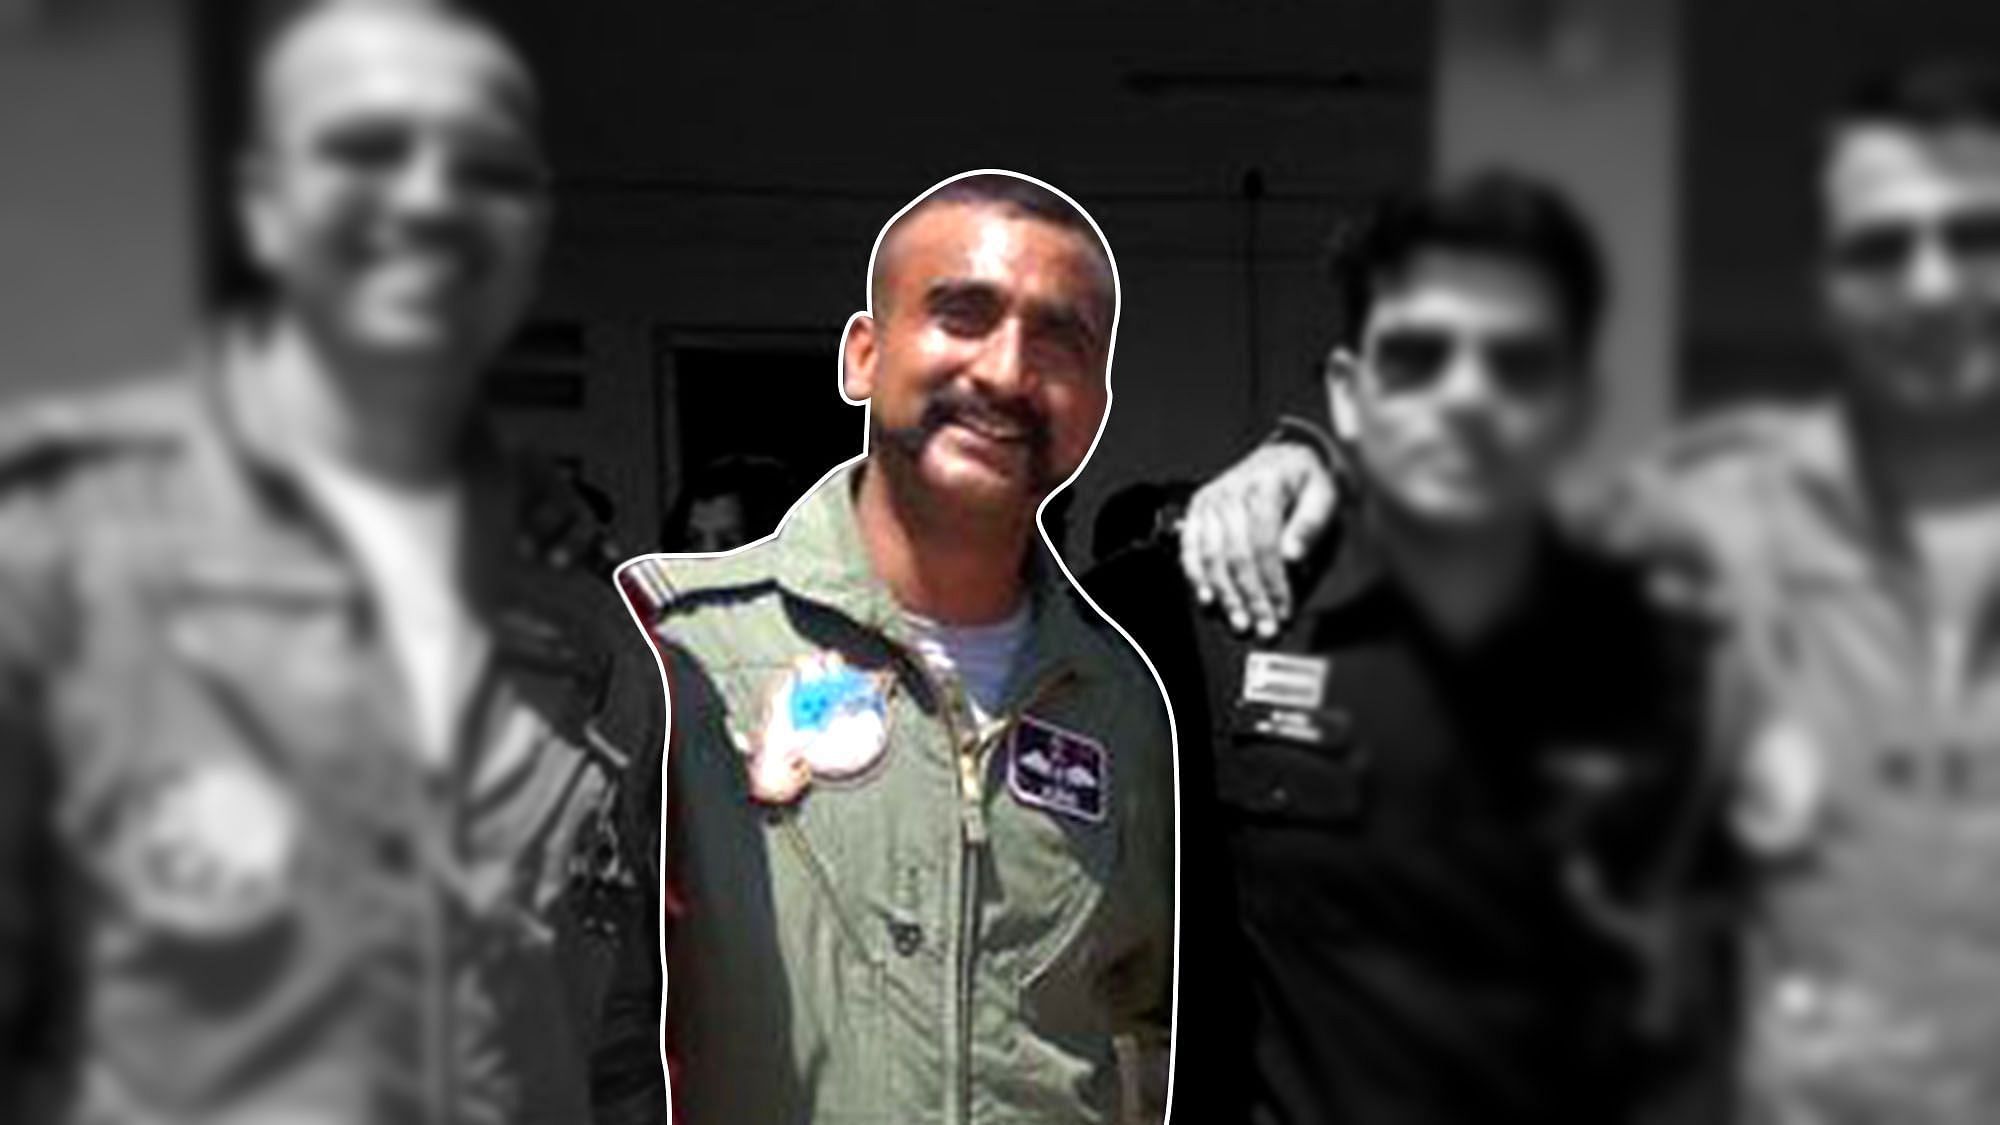 The 34-year-old is the son of Air Marshal (retd) S Varthaman, who last served as Eastern Air Command chief.